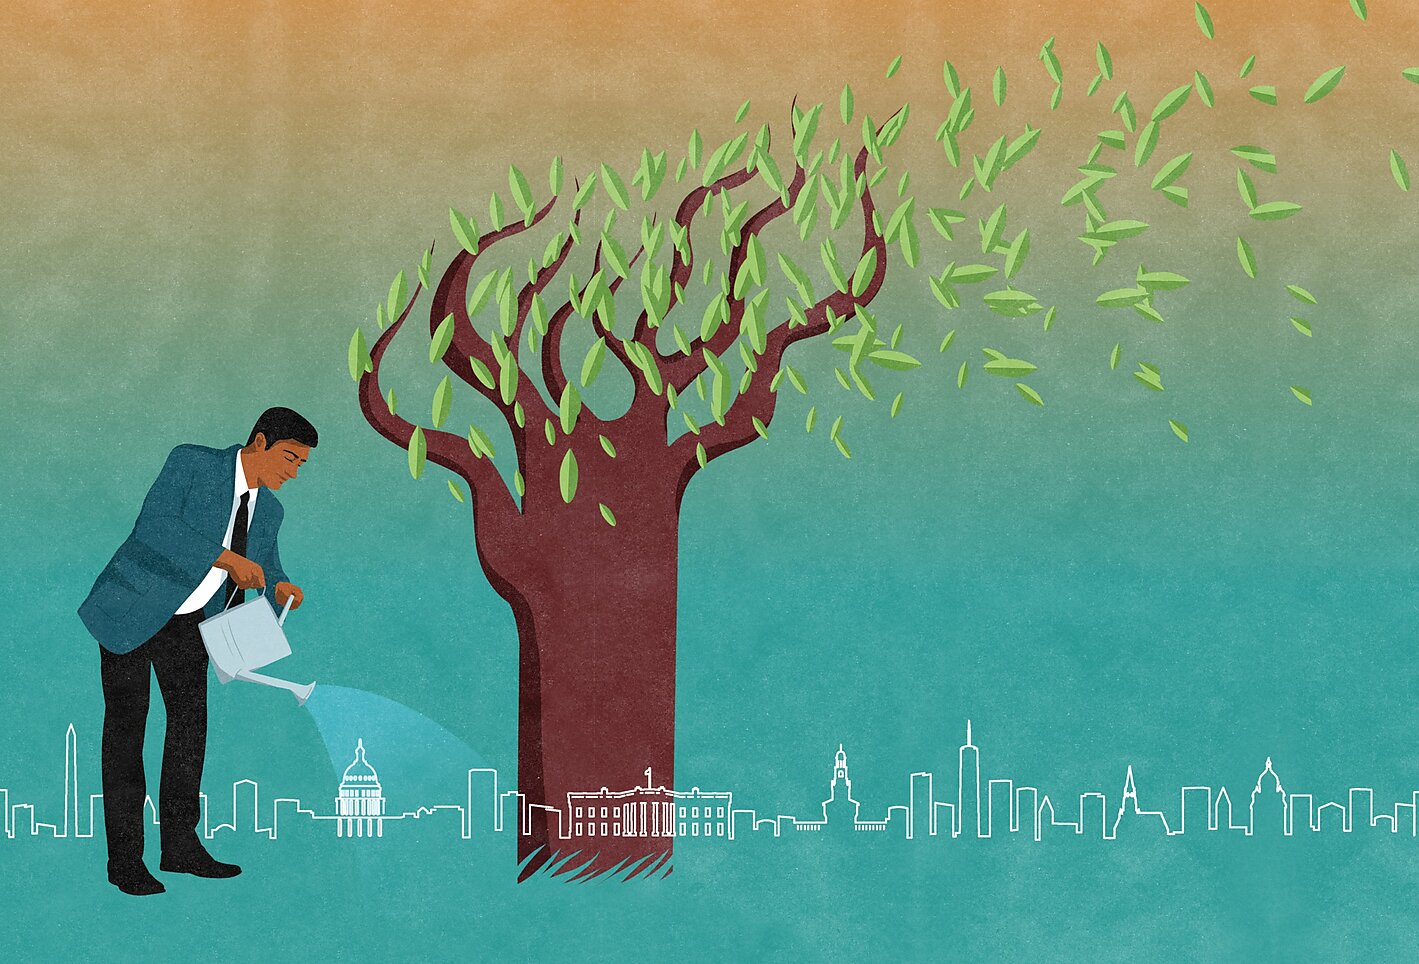 Illustration of a man watering a tree with DC overlaid